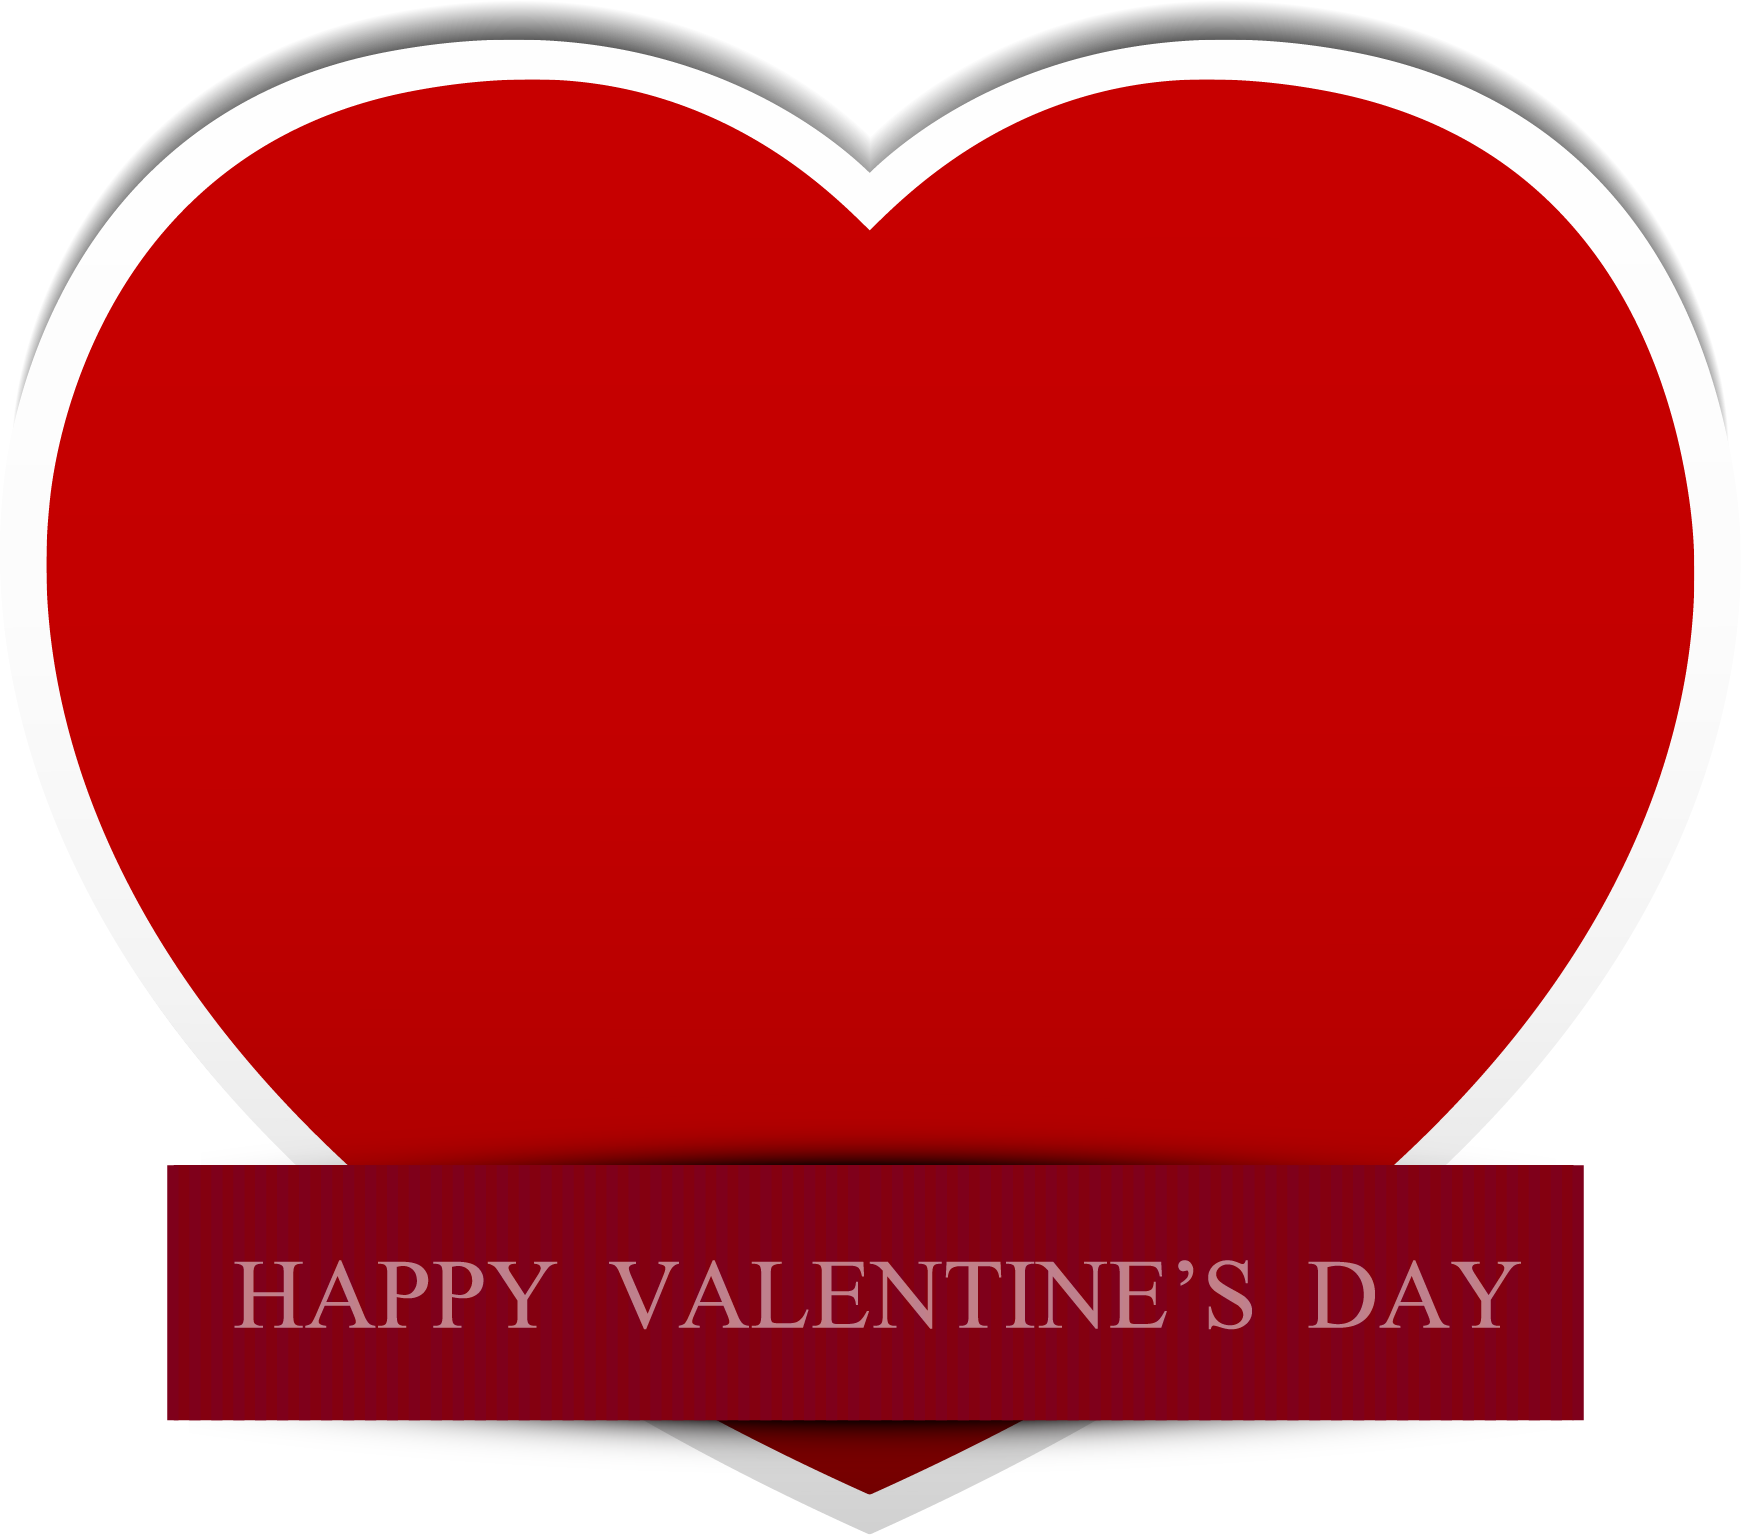 transparent background red heart valentines day clipart.